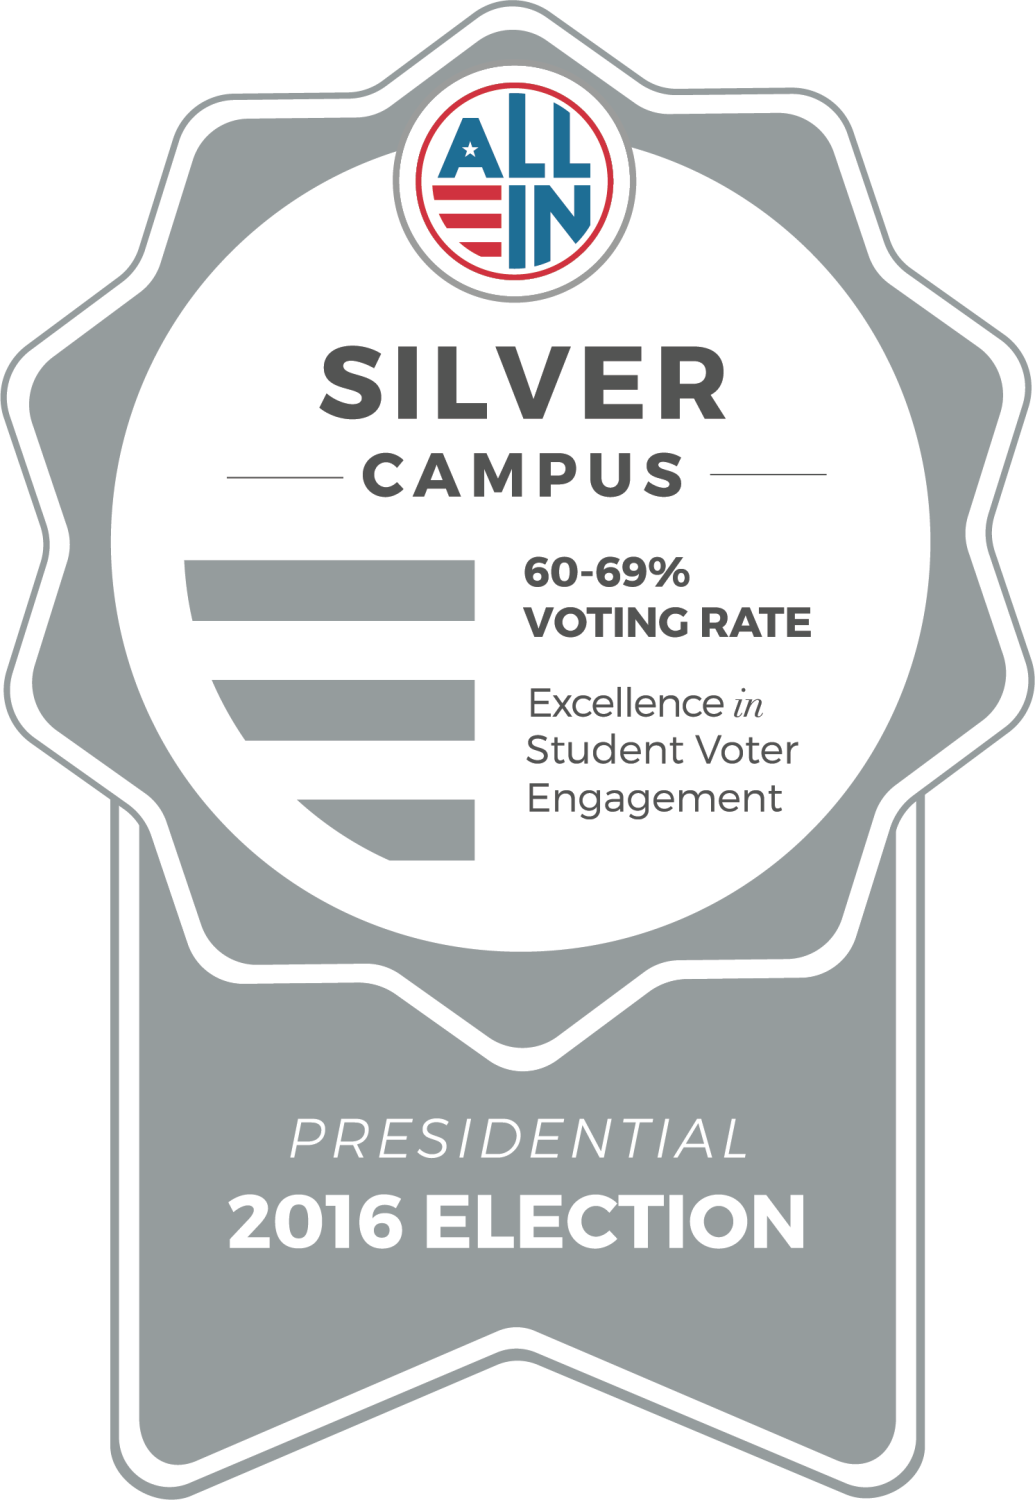 ALL IN Challenge Gold Campus ribbon for the 2016 Presidential Election awarded to campuses with a 60-69% voting rate.